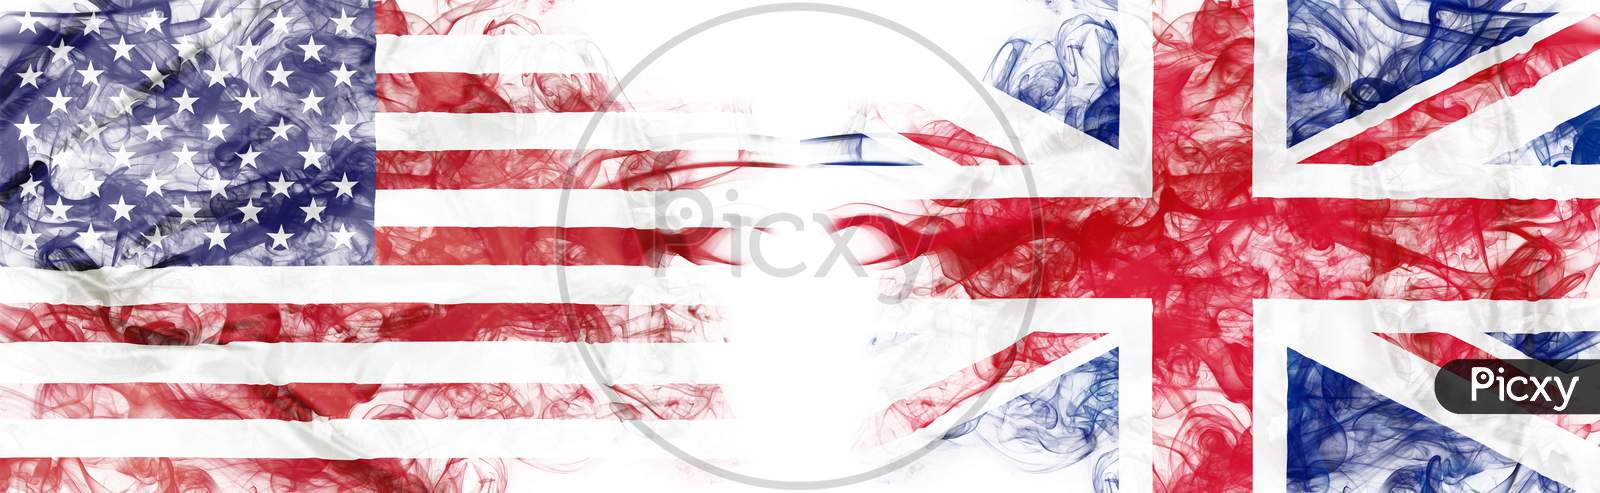 United States And United Kingdom Crisis With Smoky Flags